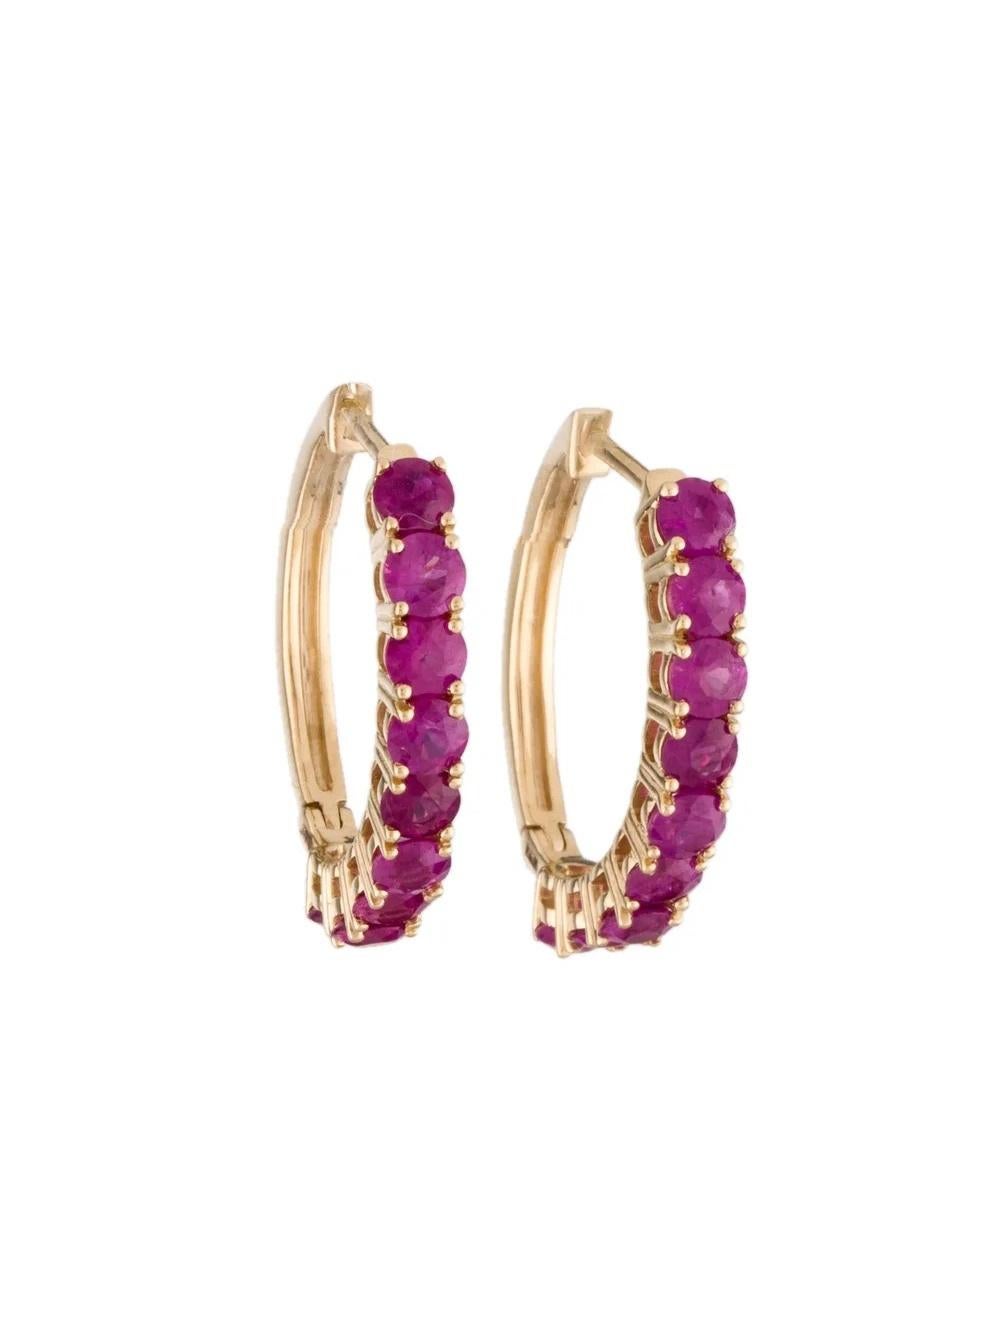 14K Ruby Hoop Earrings - Elegant Red Gemstones, Timeless Style Statement Jewelry In New Condition For Sale In Holtsville, NY